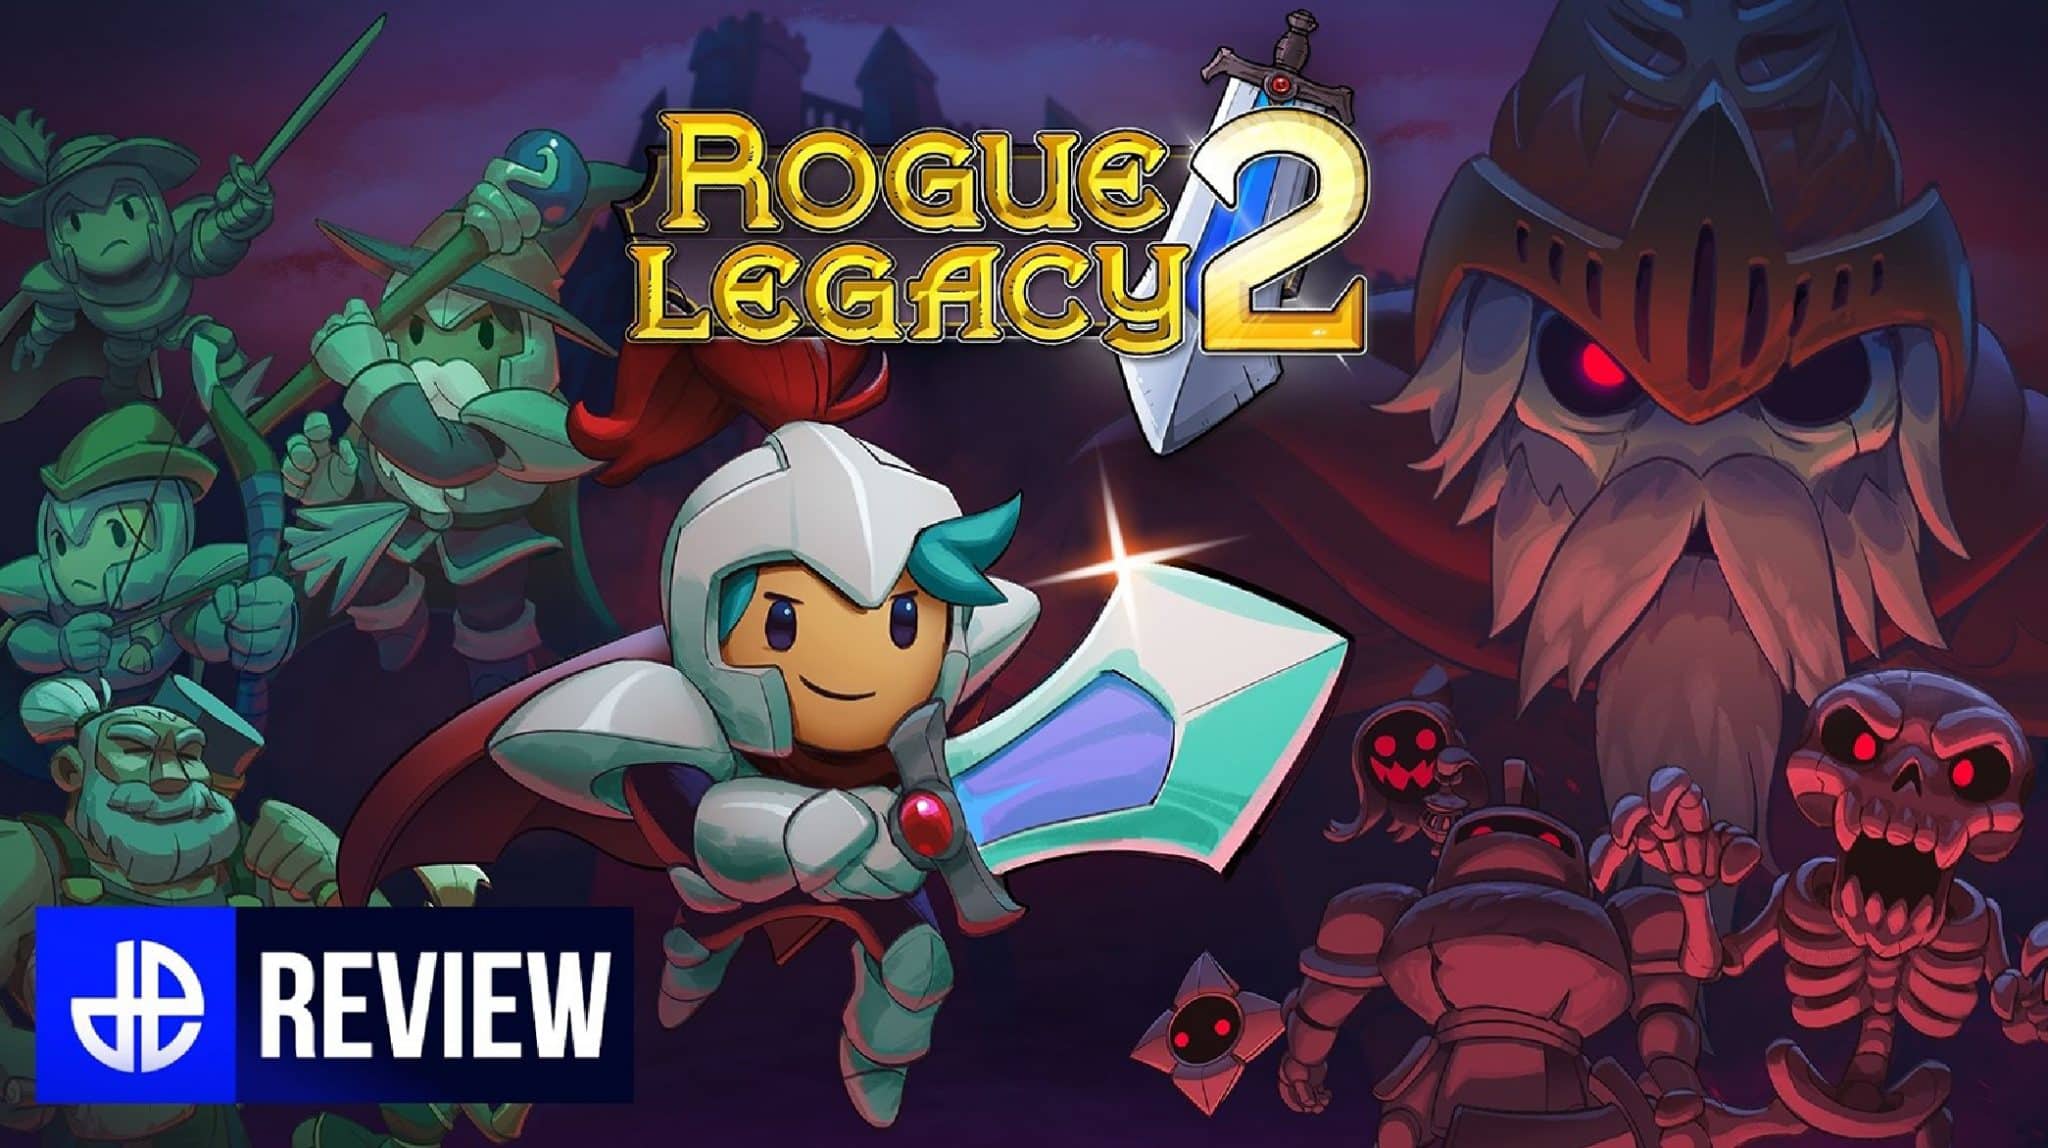 Rogue Legacy 2 cover art